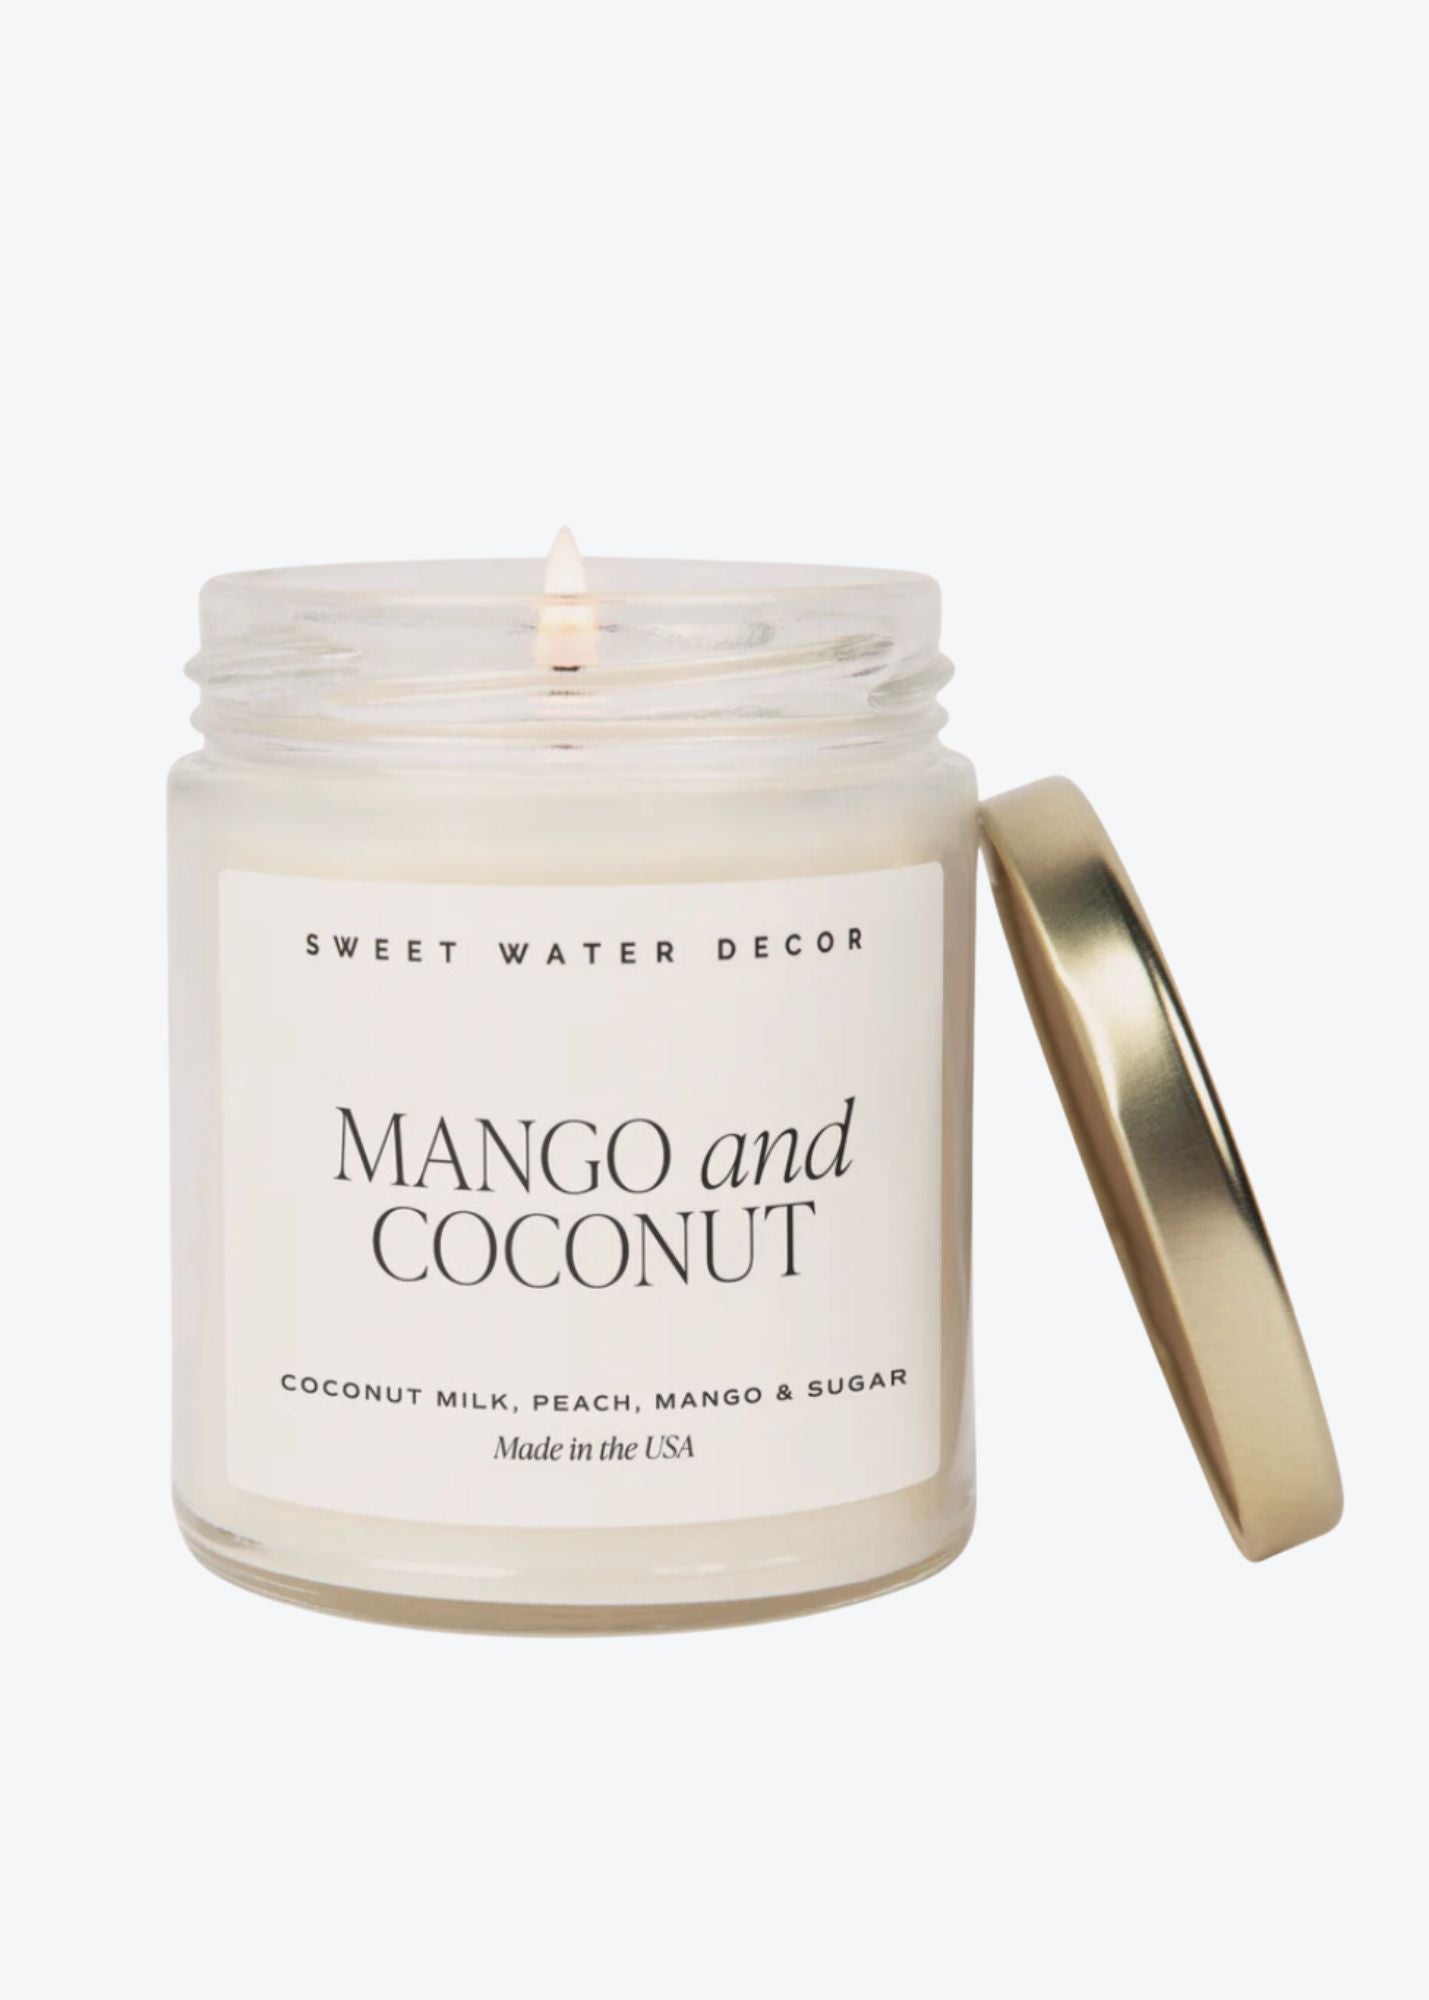 Mango and Coconut 9 oz Soy Candle Gifts